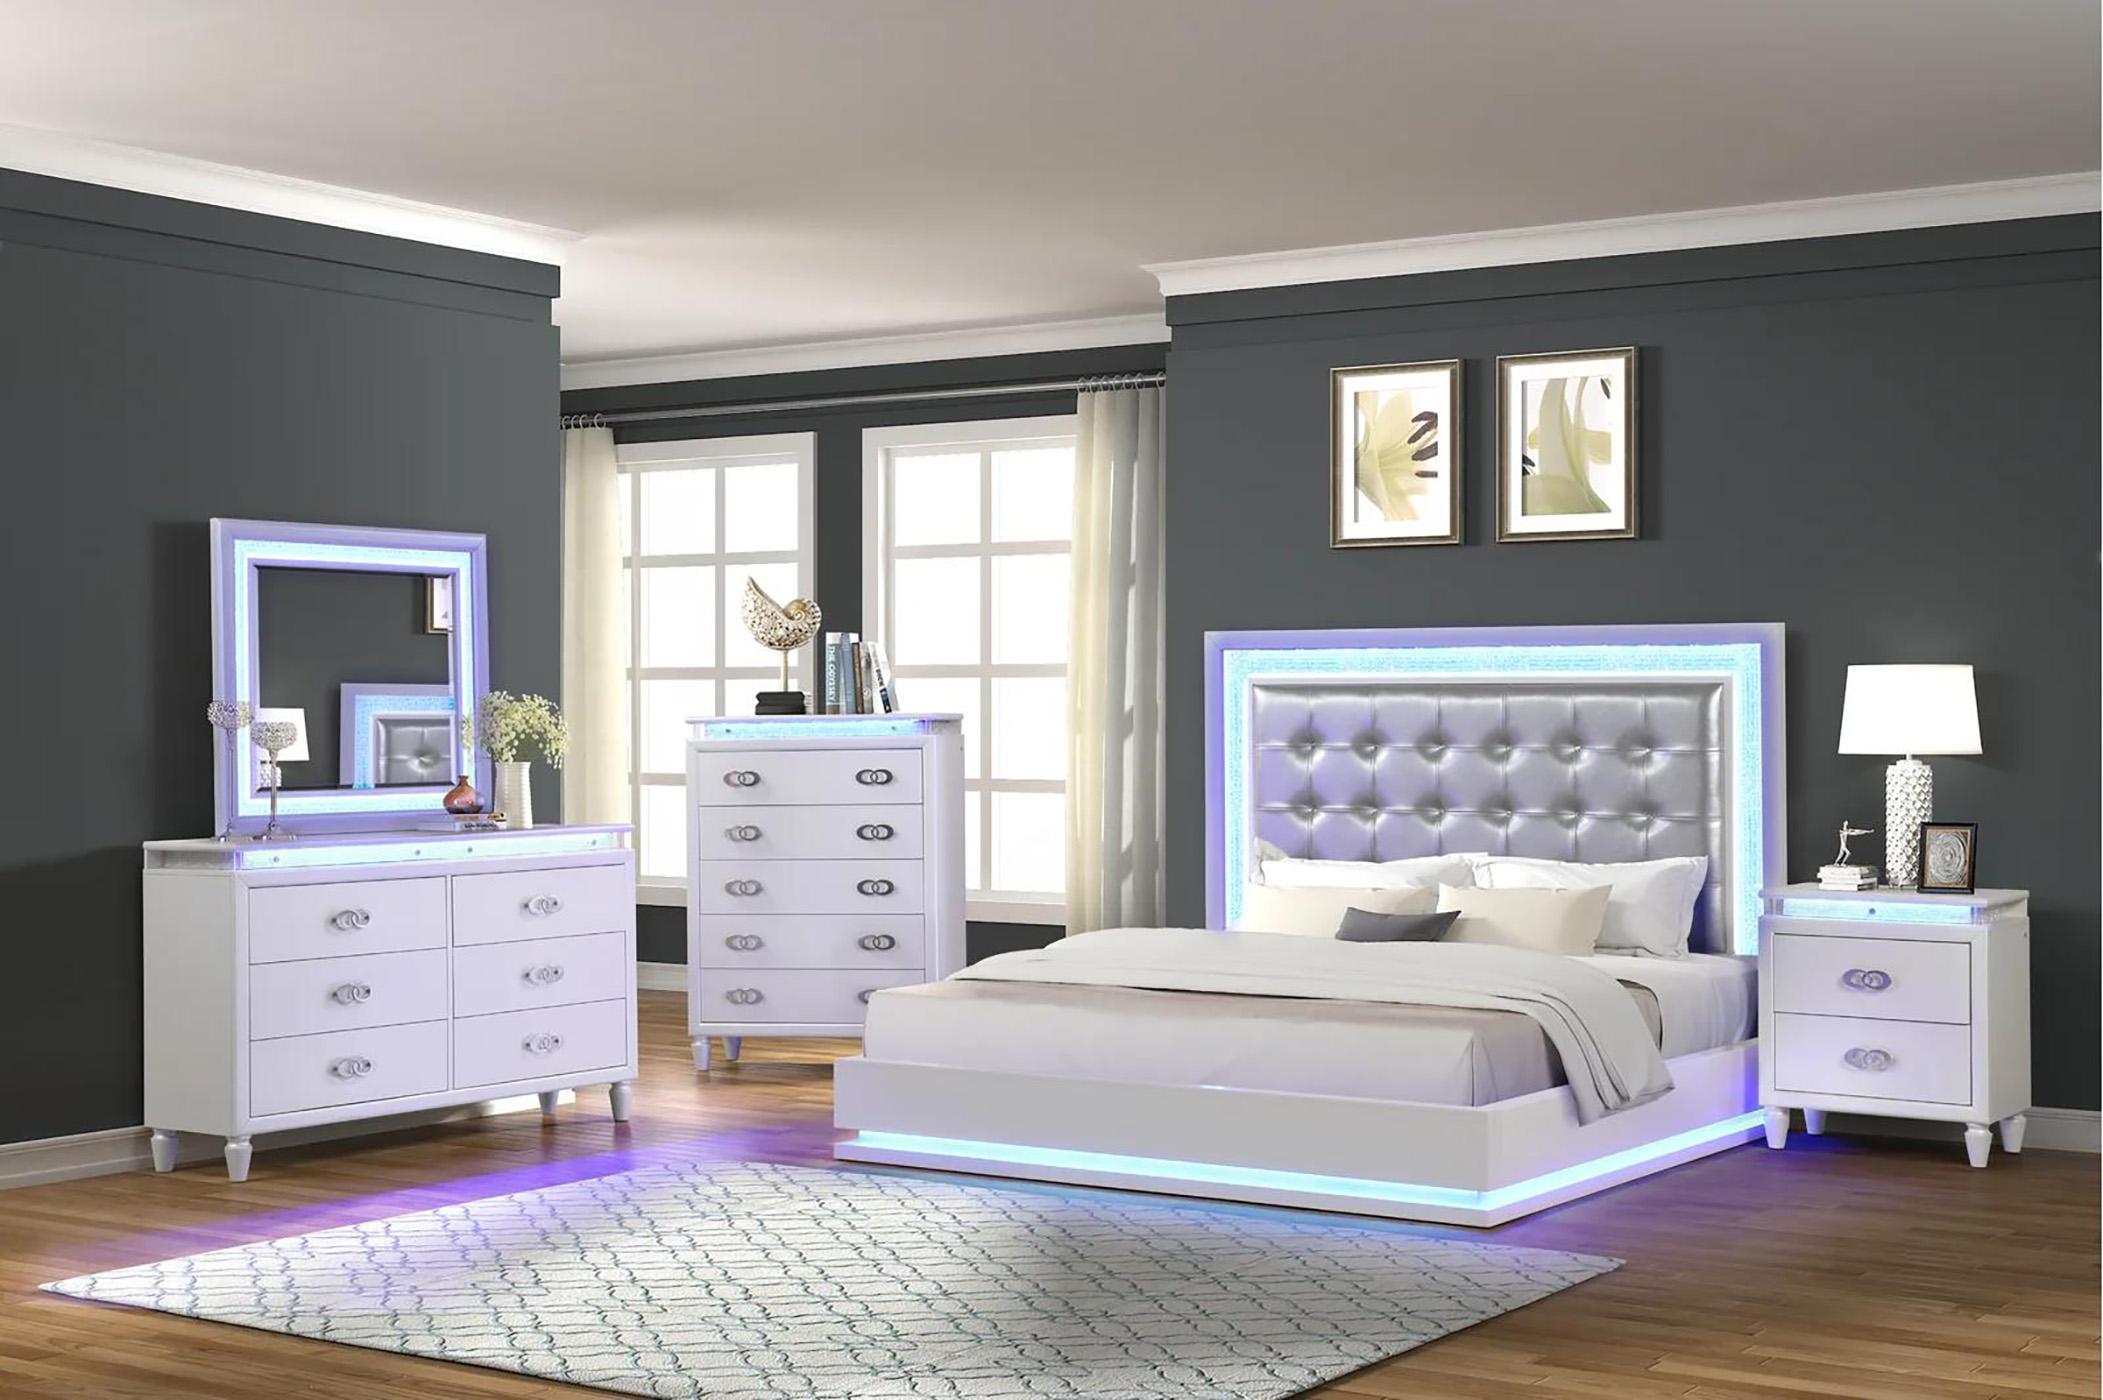 

    
Milky White Tufted King Led Bedroom Set 4Pcs PASSION Galaxy Home Contemporary
